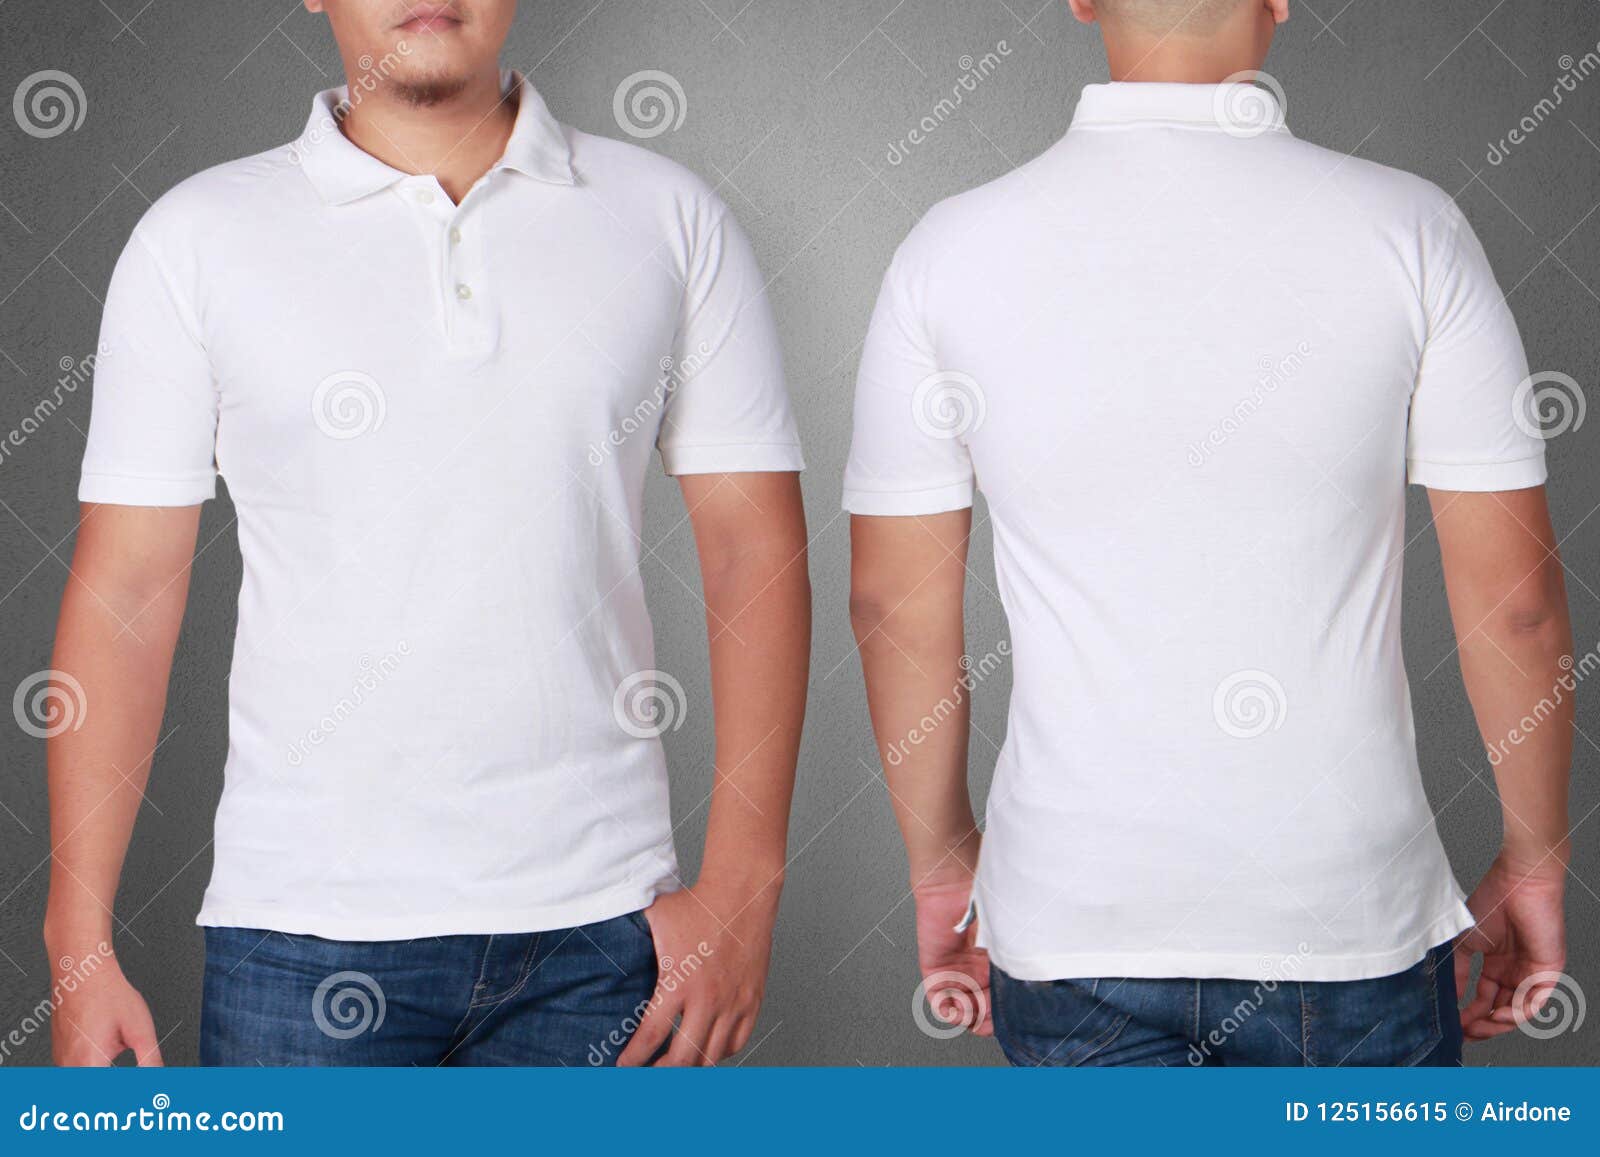 Polo Shirt Template Mock Up Stock Image - Image of people, color: 125156615